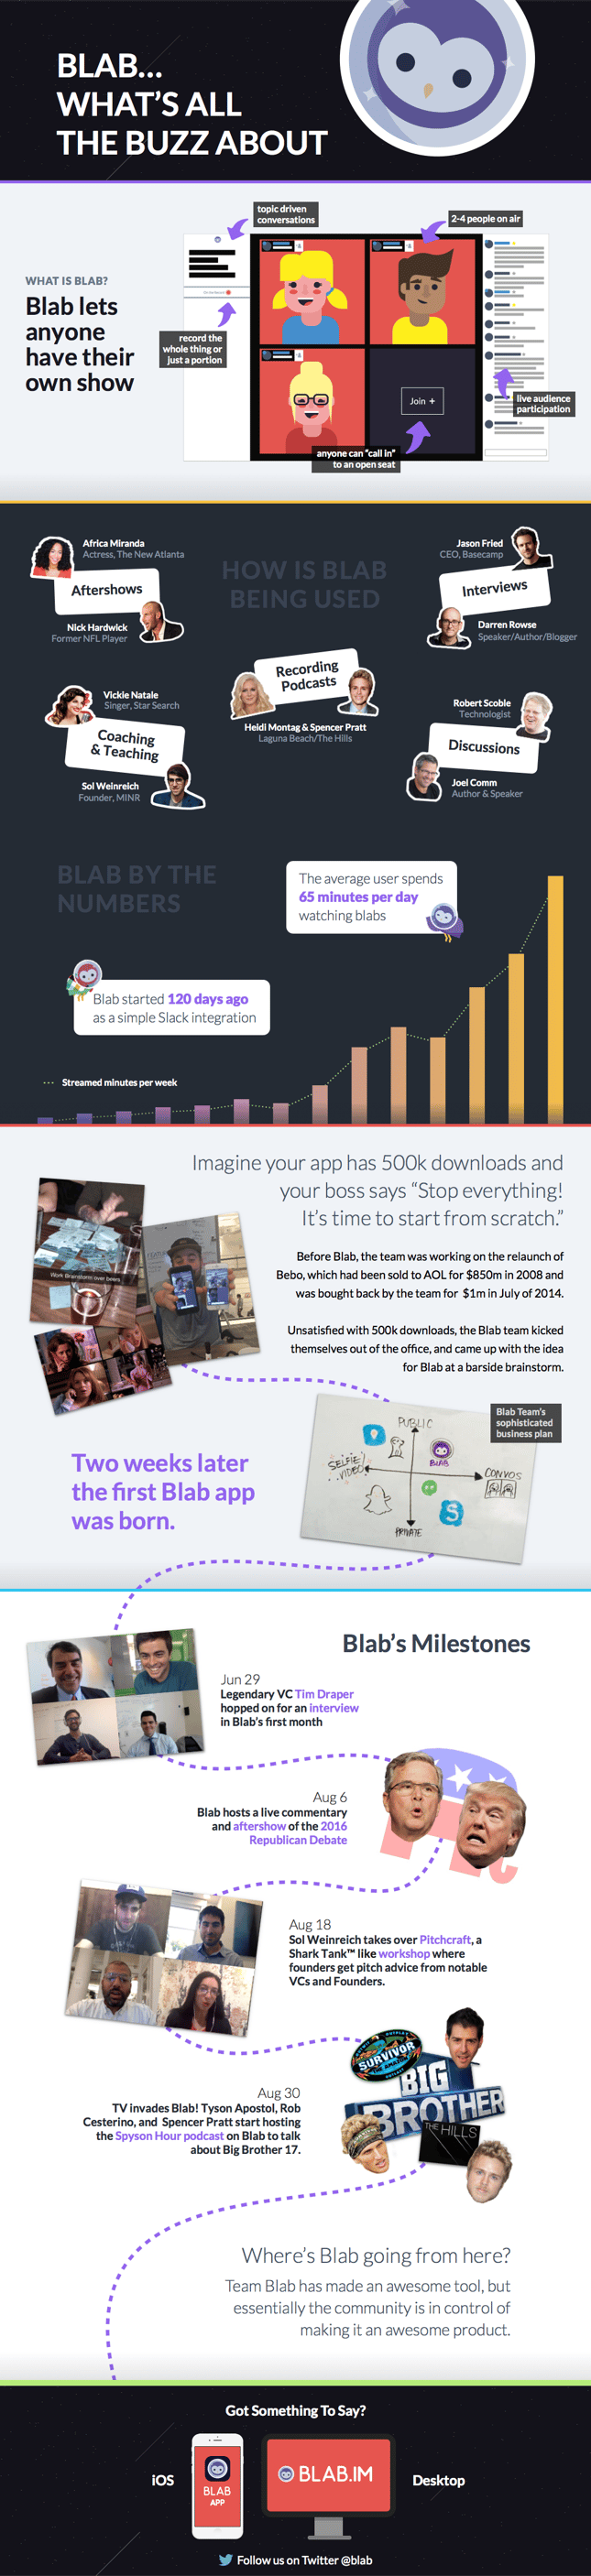 blab_infographic_wide-b5b76be23c.png